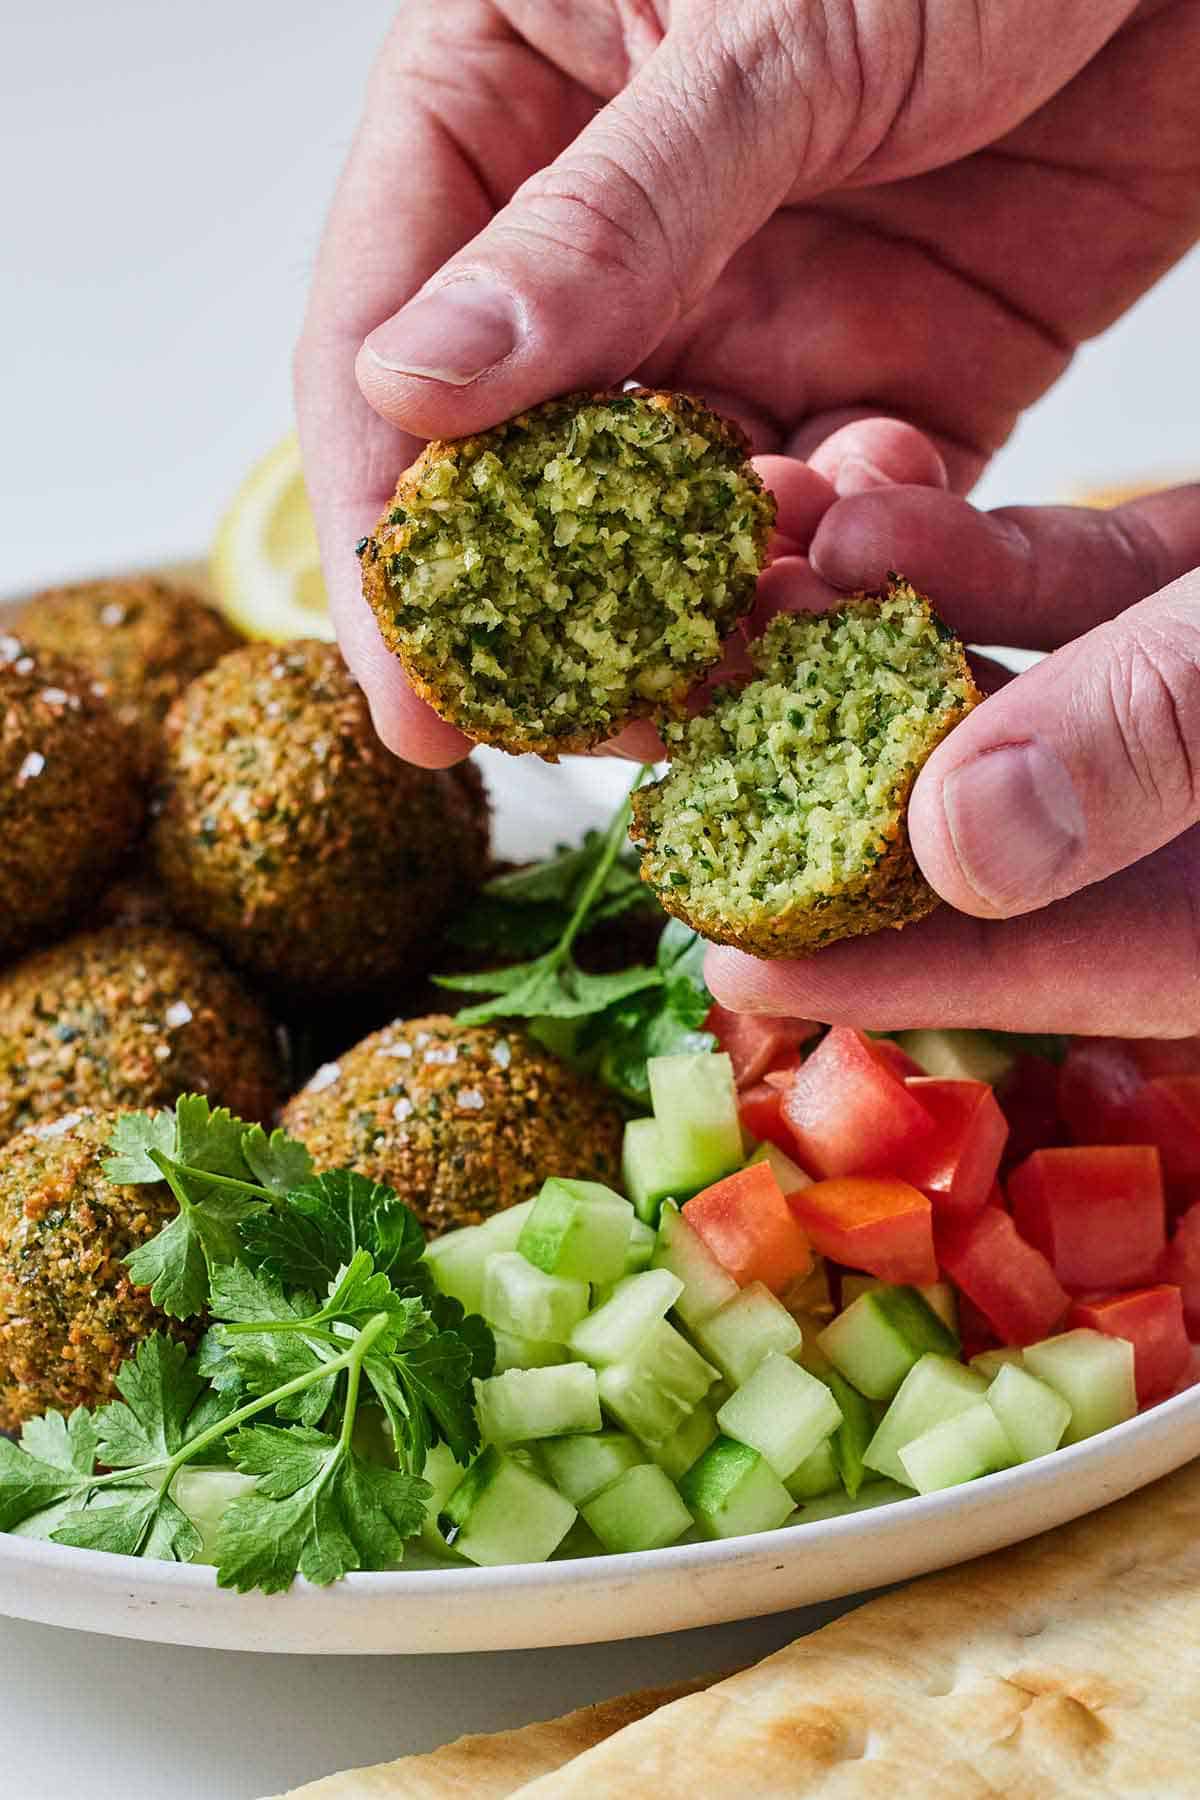 A falafel torn in half by hand.